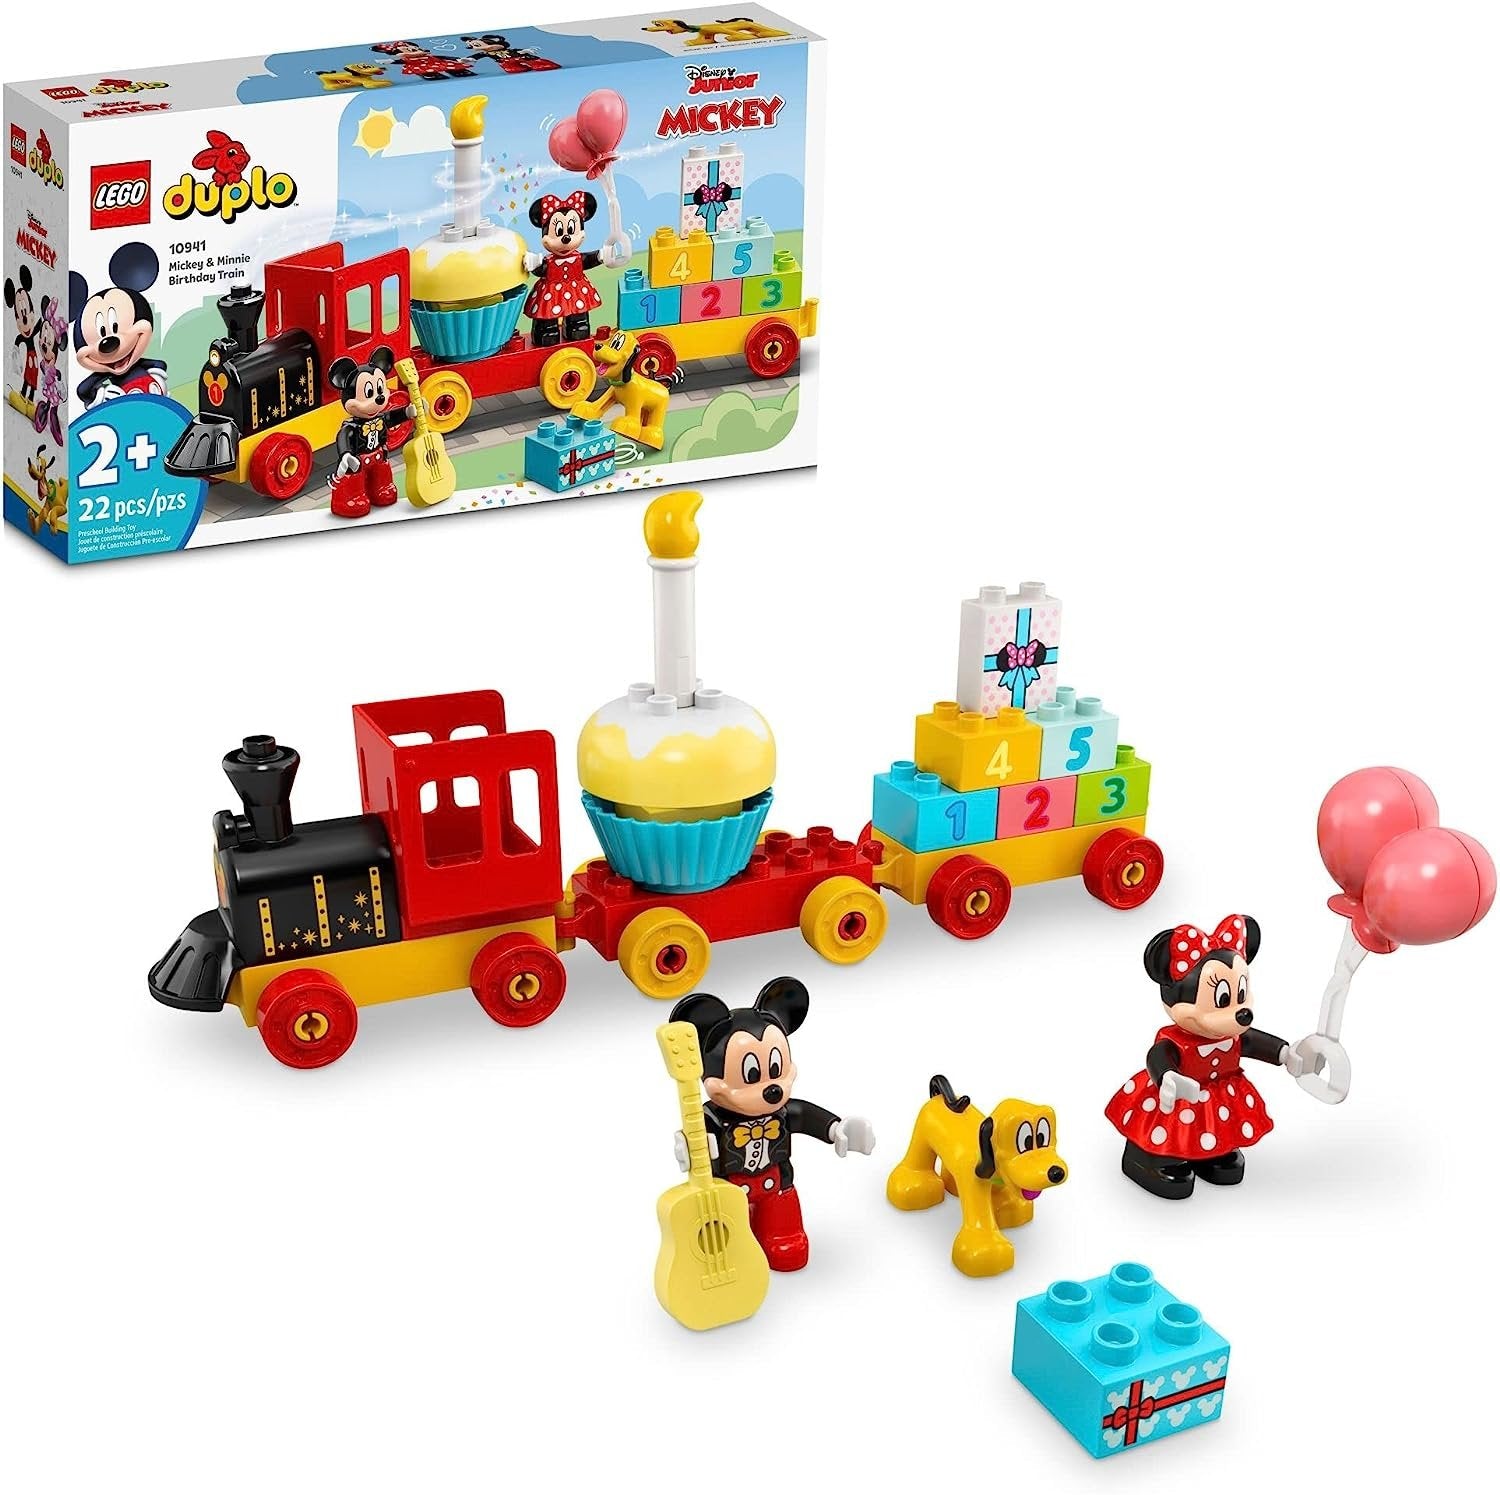 LEGO DUPLO Disney Mickey & Minnie Mouse Birthday Train - Building Toys for Toddlers with Number Bricks, Cake and Balloons, Early Learning and Motor Skill Toy, Great Gift for Girls, Boys Ages 2+, 10941